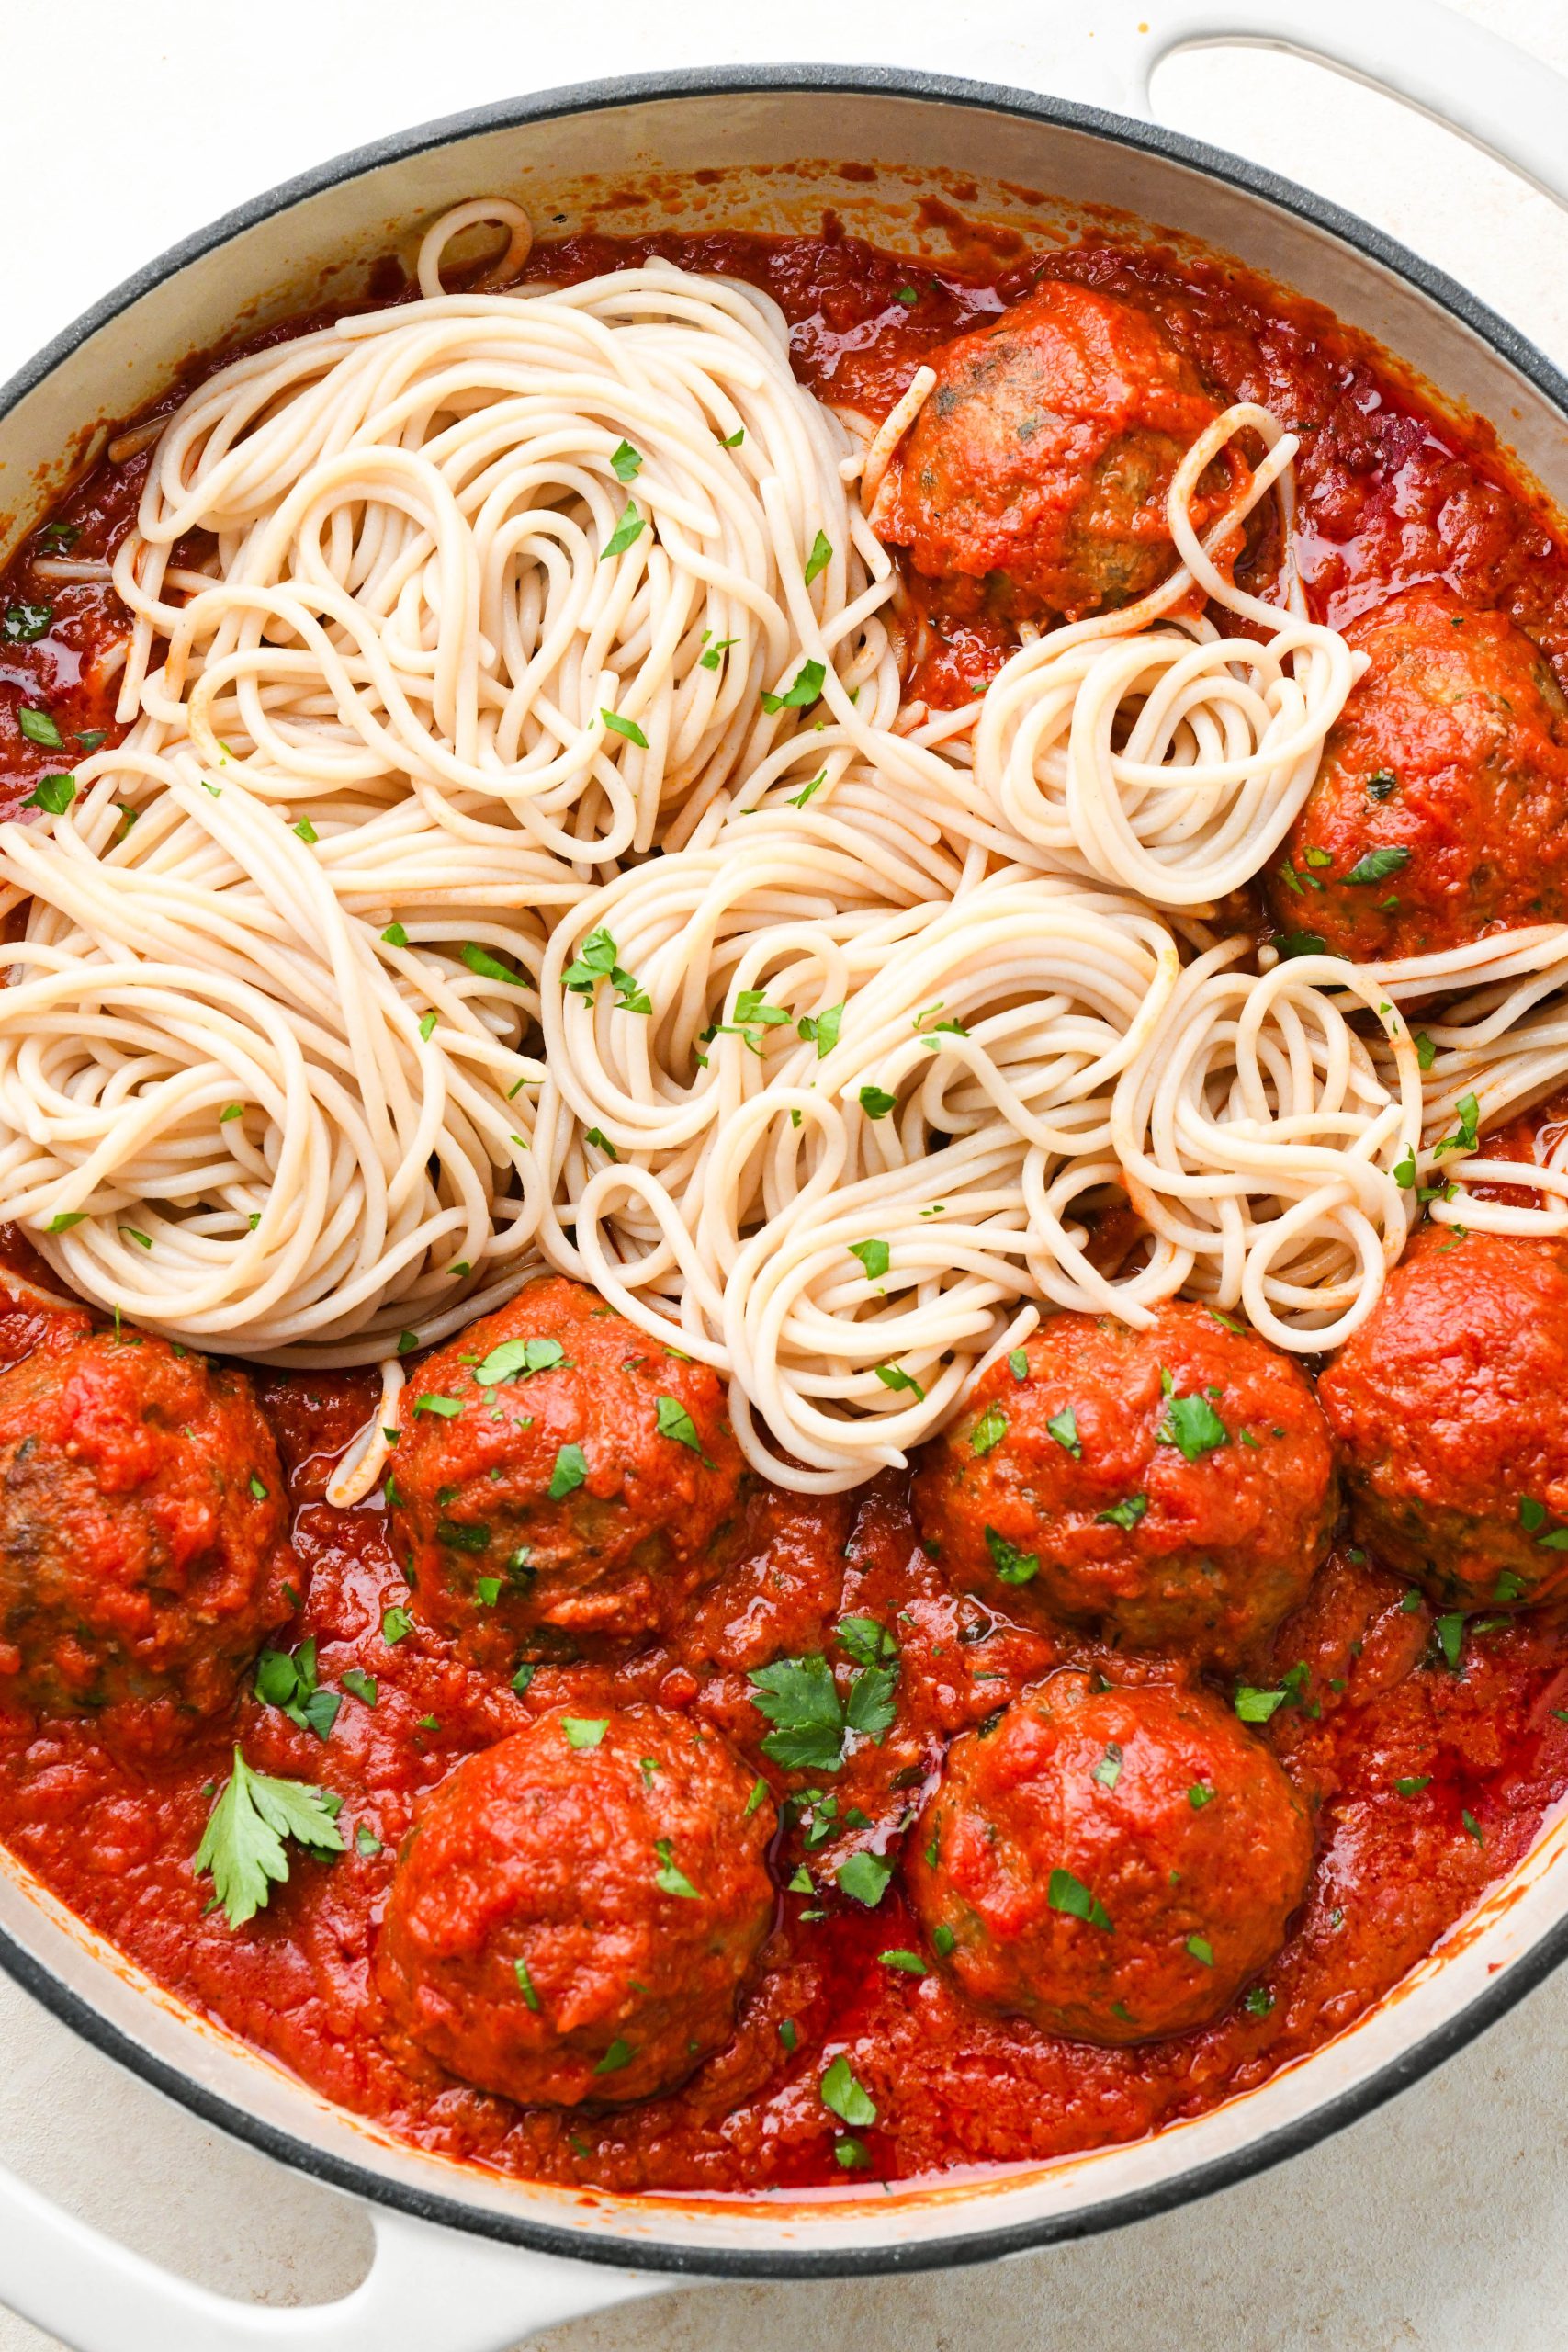 Gluten Free Meatballs - Made Without Breadcrumbs!